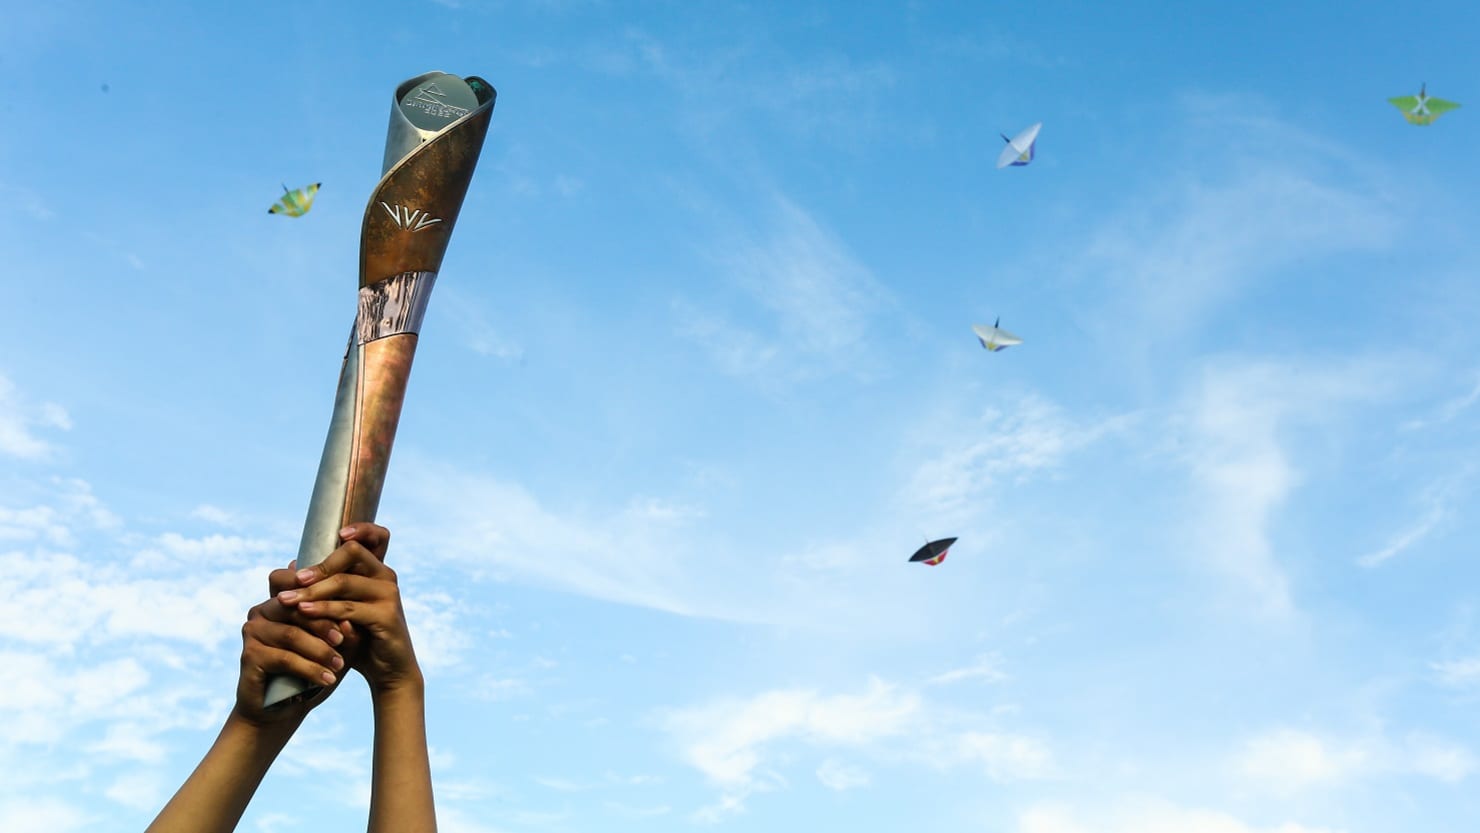 Birmingham 2022 Queen’s Baton Relay to visit Plymouth and The Box | The Box Plymouth